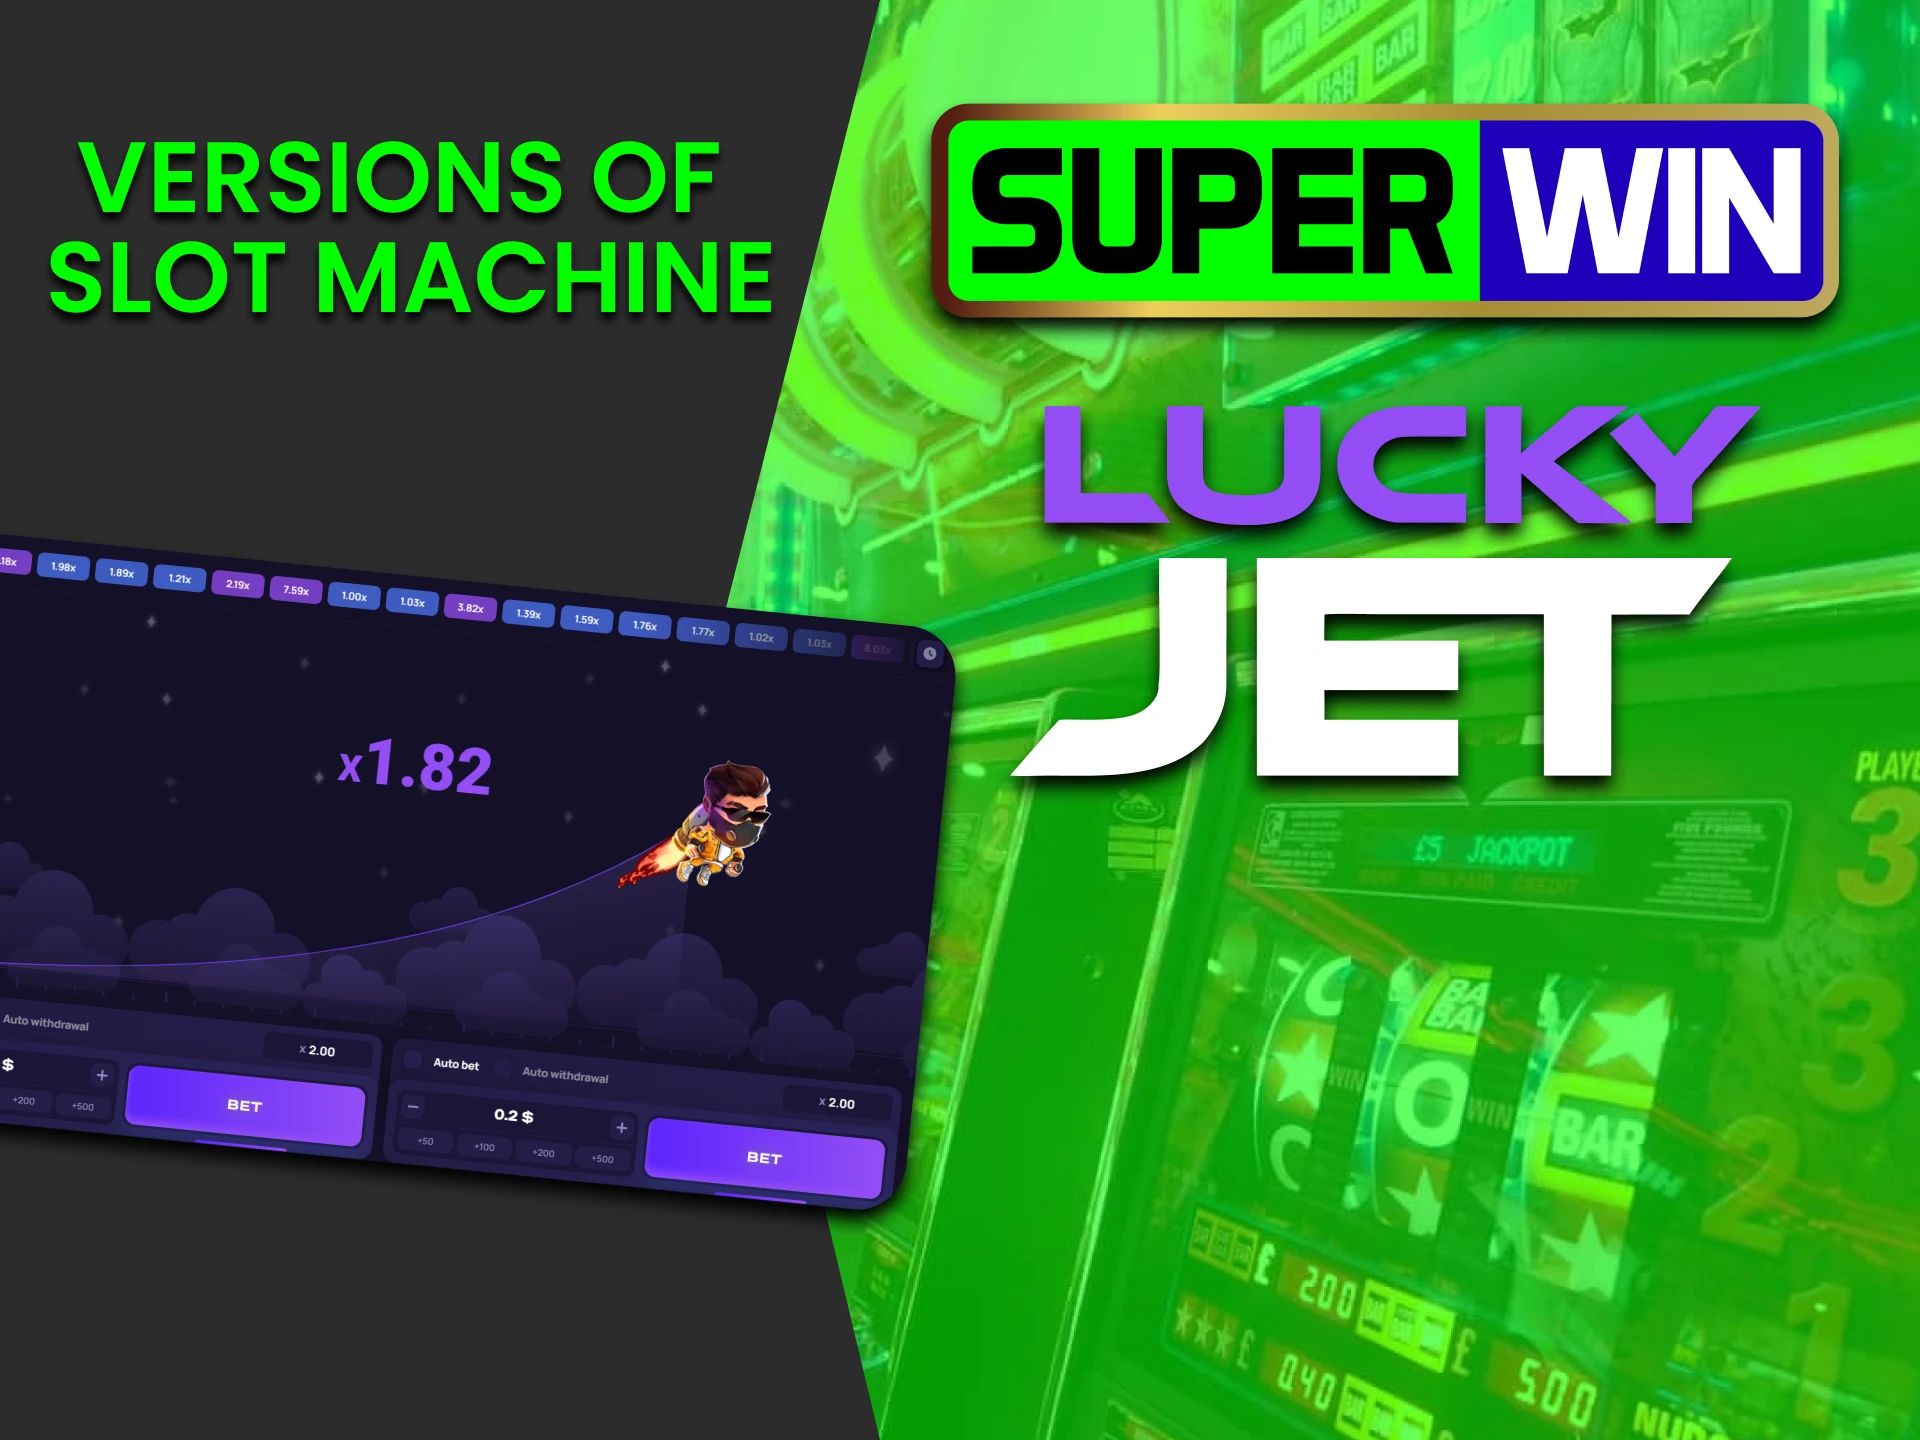 We will talk about the Superwin version of the Lucky Jet "Slot Machine" game.